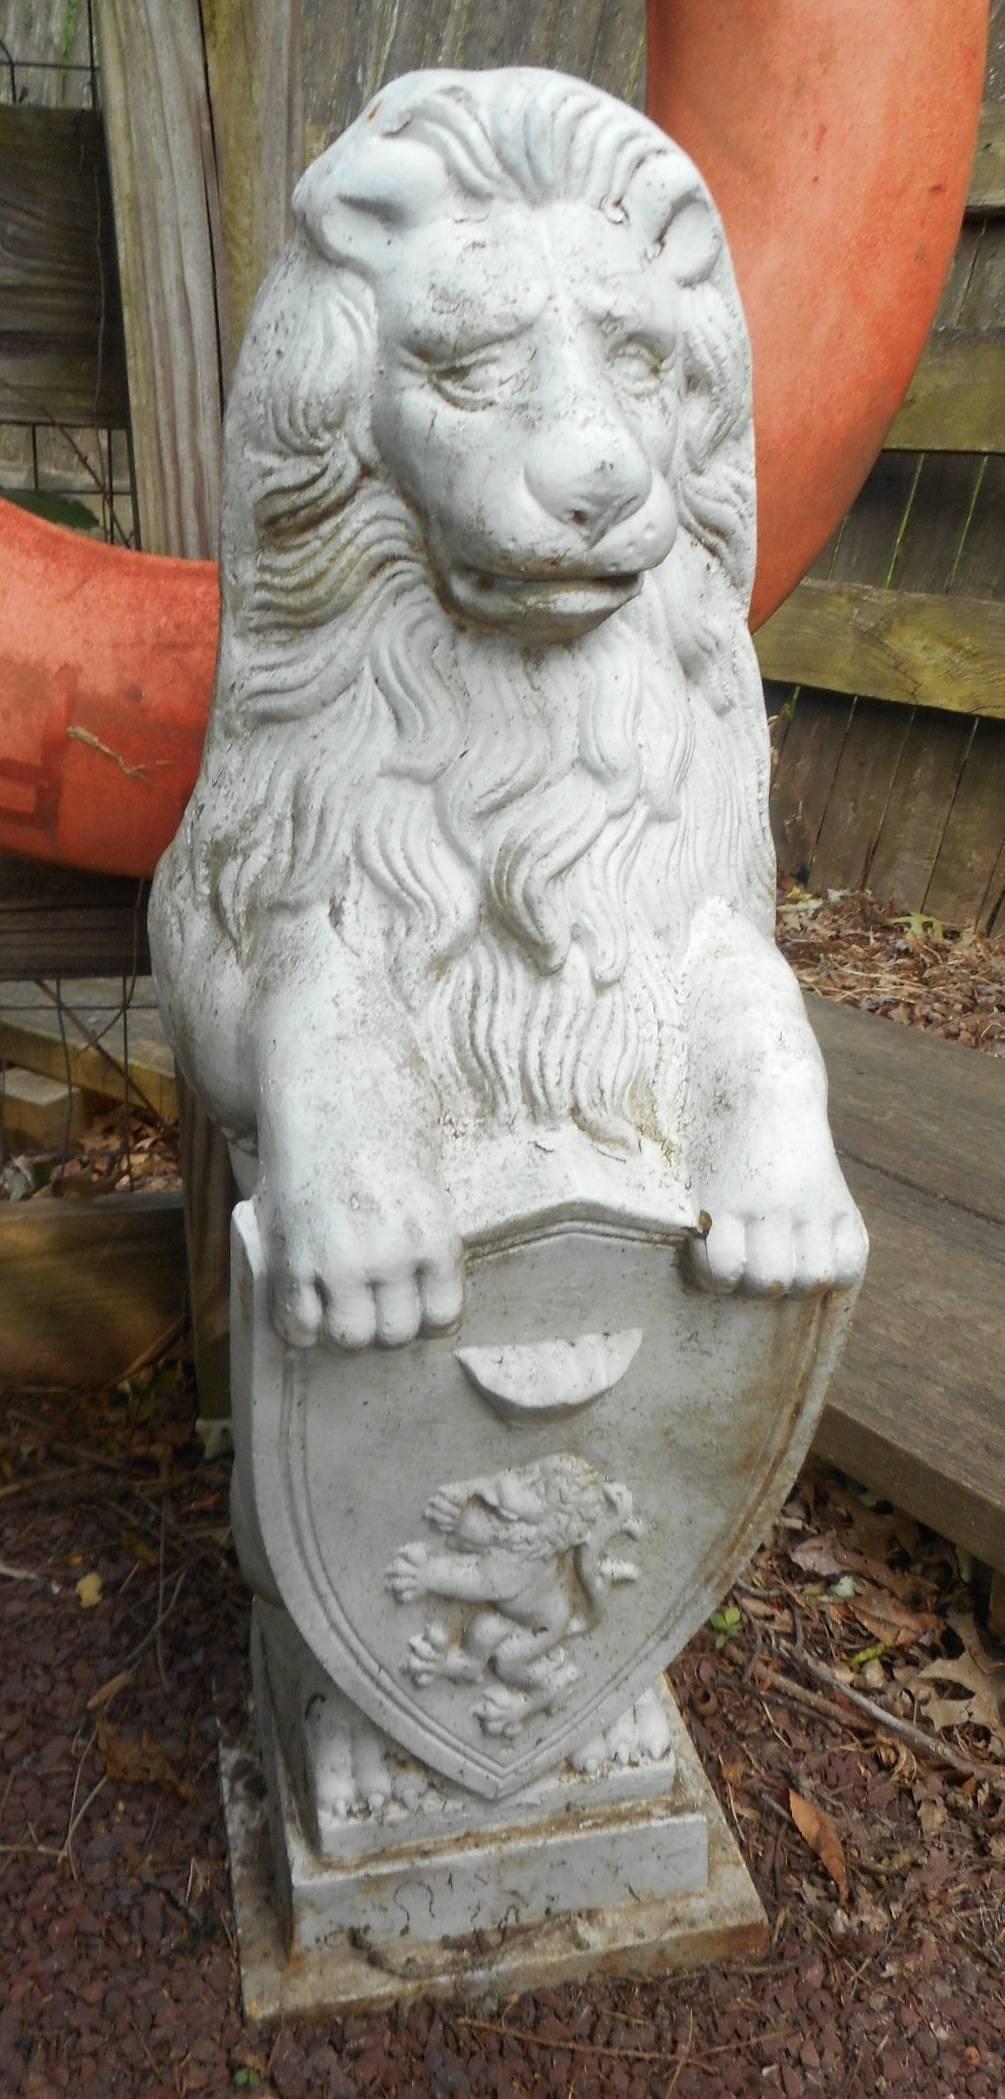 Gorgeous pair of lion statues made of cast iron holding a shield on a small pedestal base. Unique garden ornaments with intricate etched detail from the shield to the lions mane. This exquisite pair make the perfect addition to the entrance of any